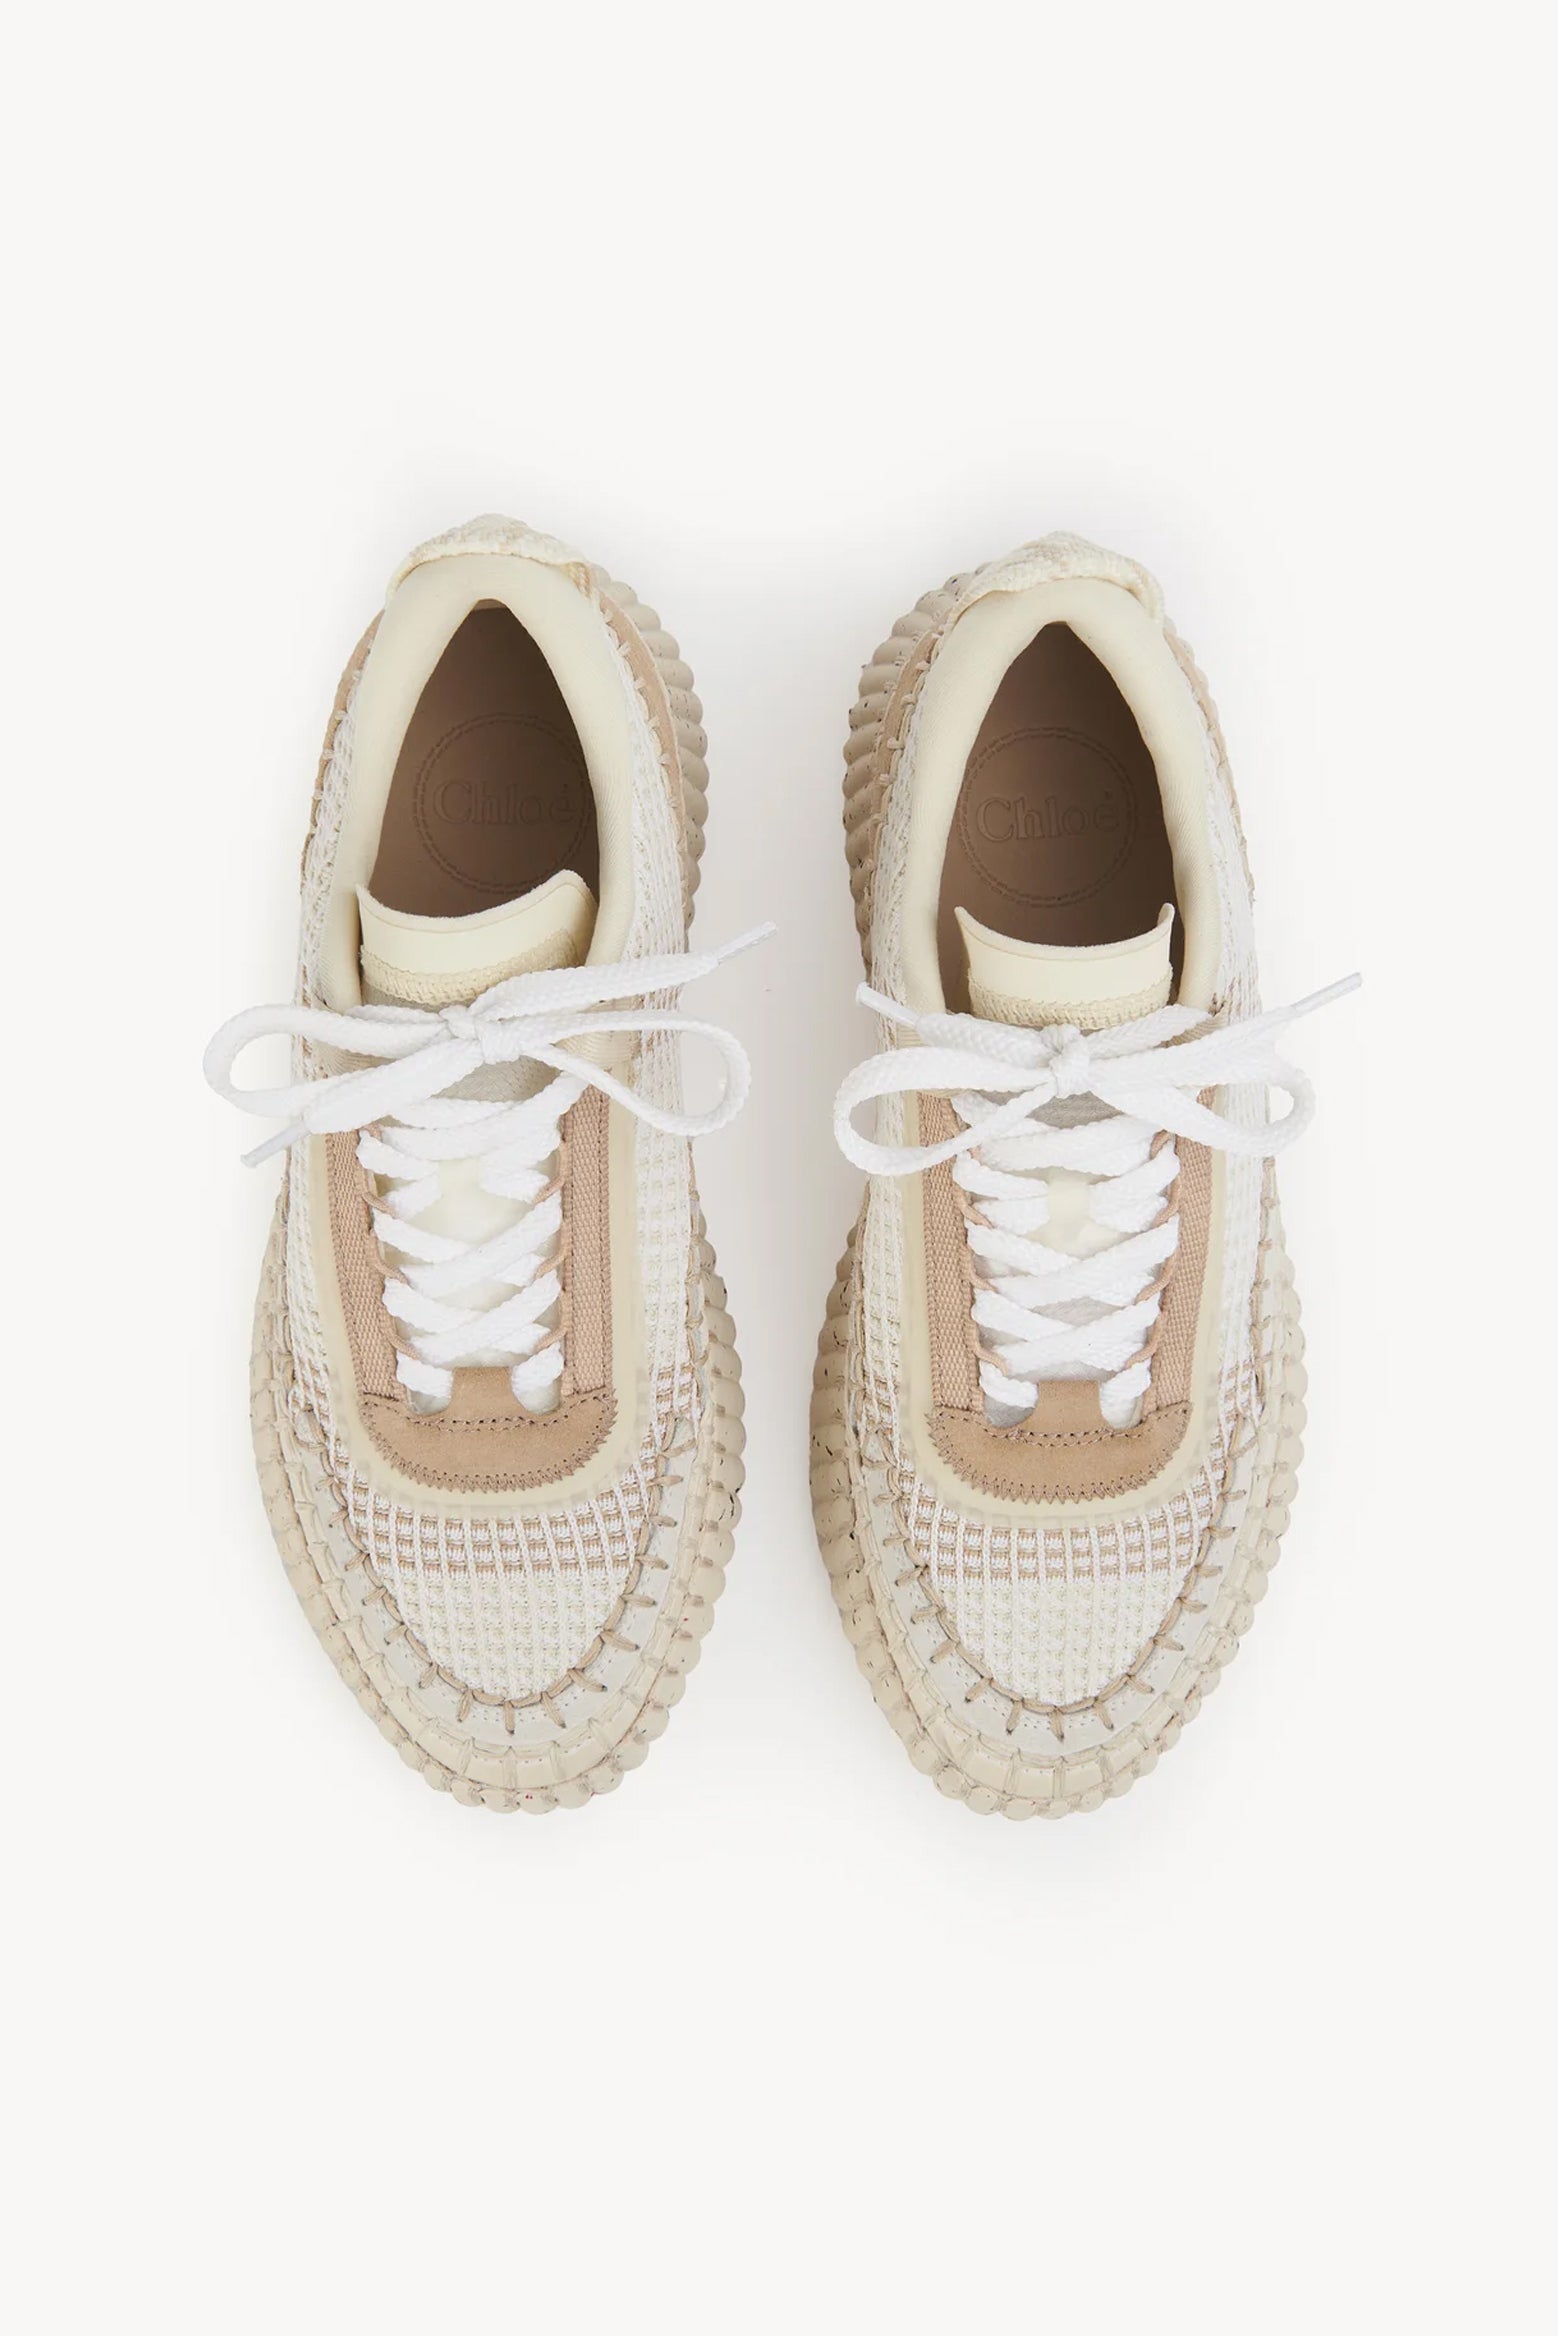 Chloé Nama Sneaker in Pearl Beige available at The New Trend Australia.